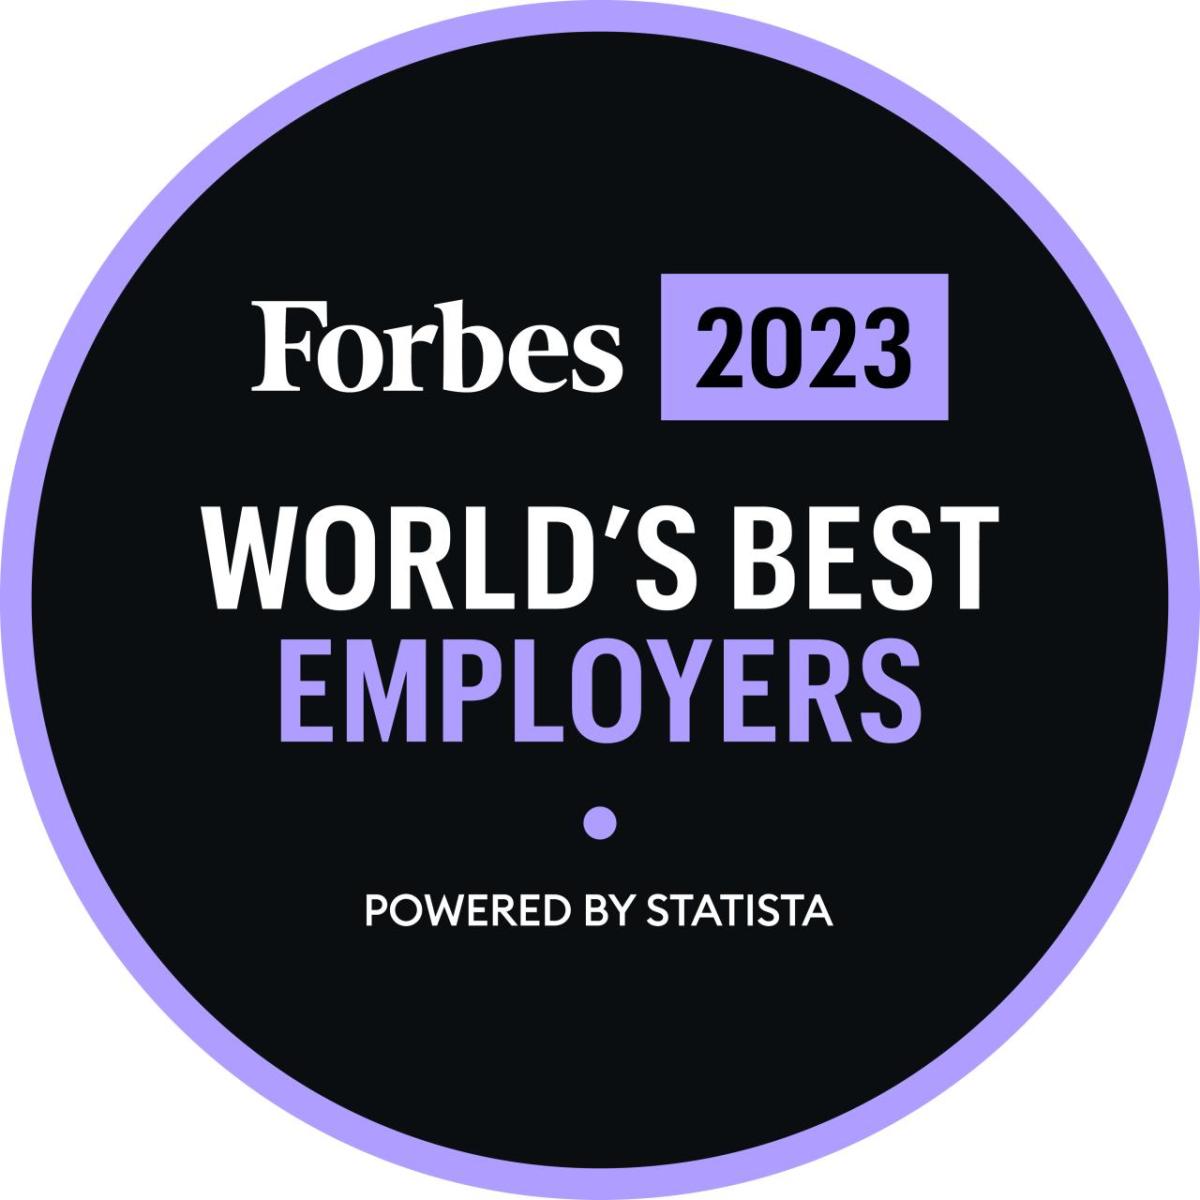 Forbes 2023 World's Best Employers badge.